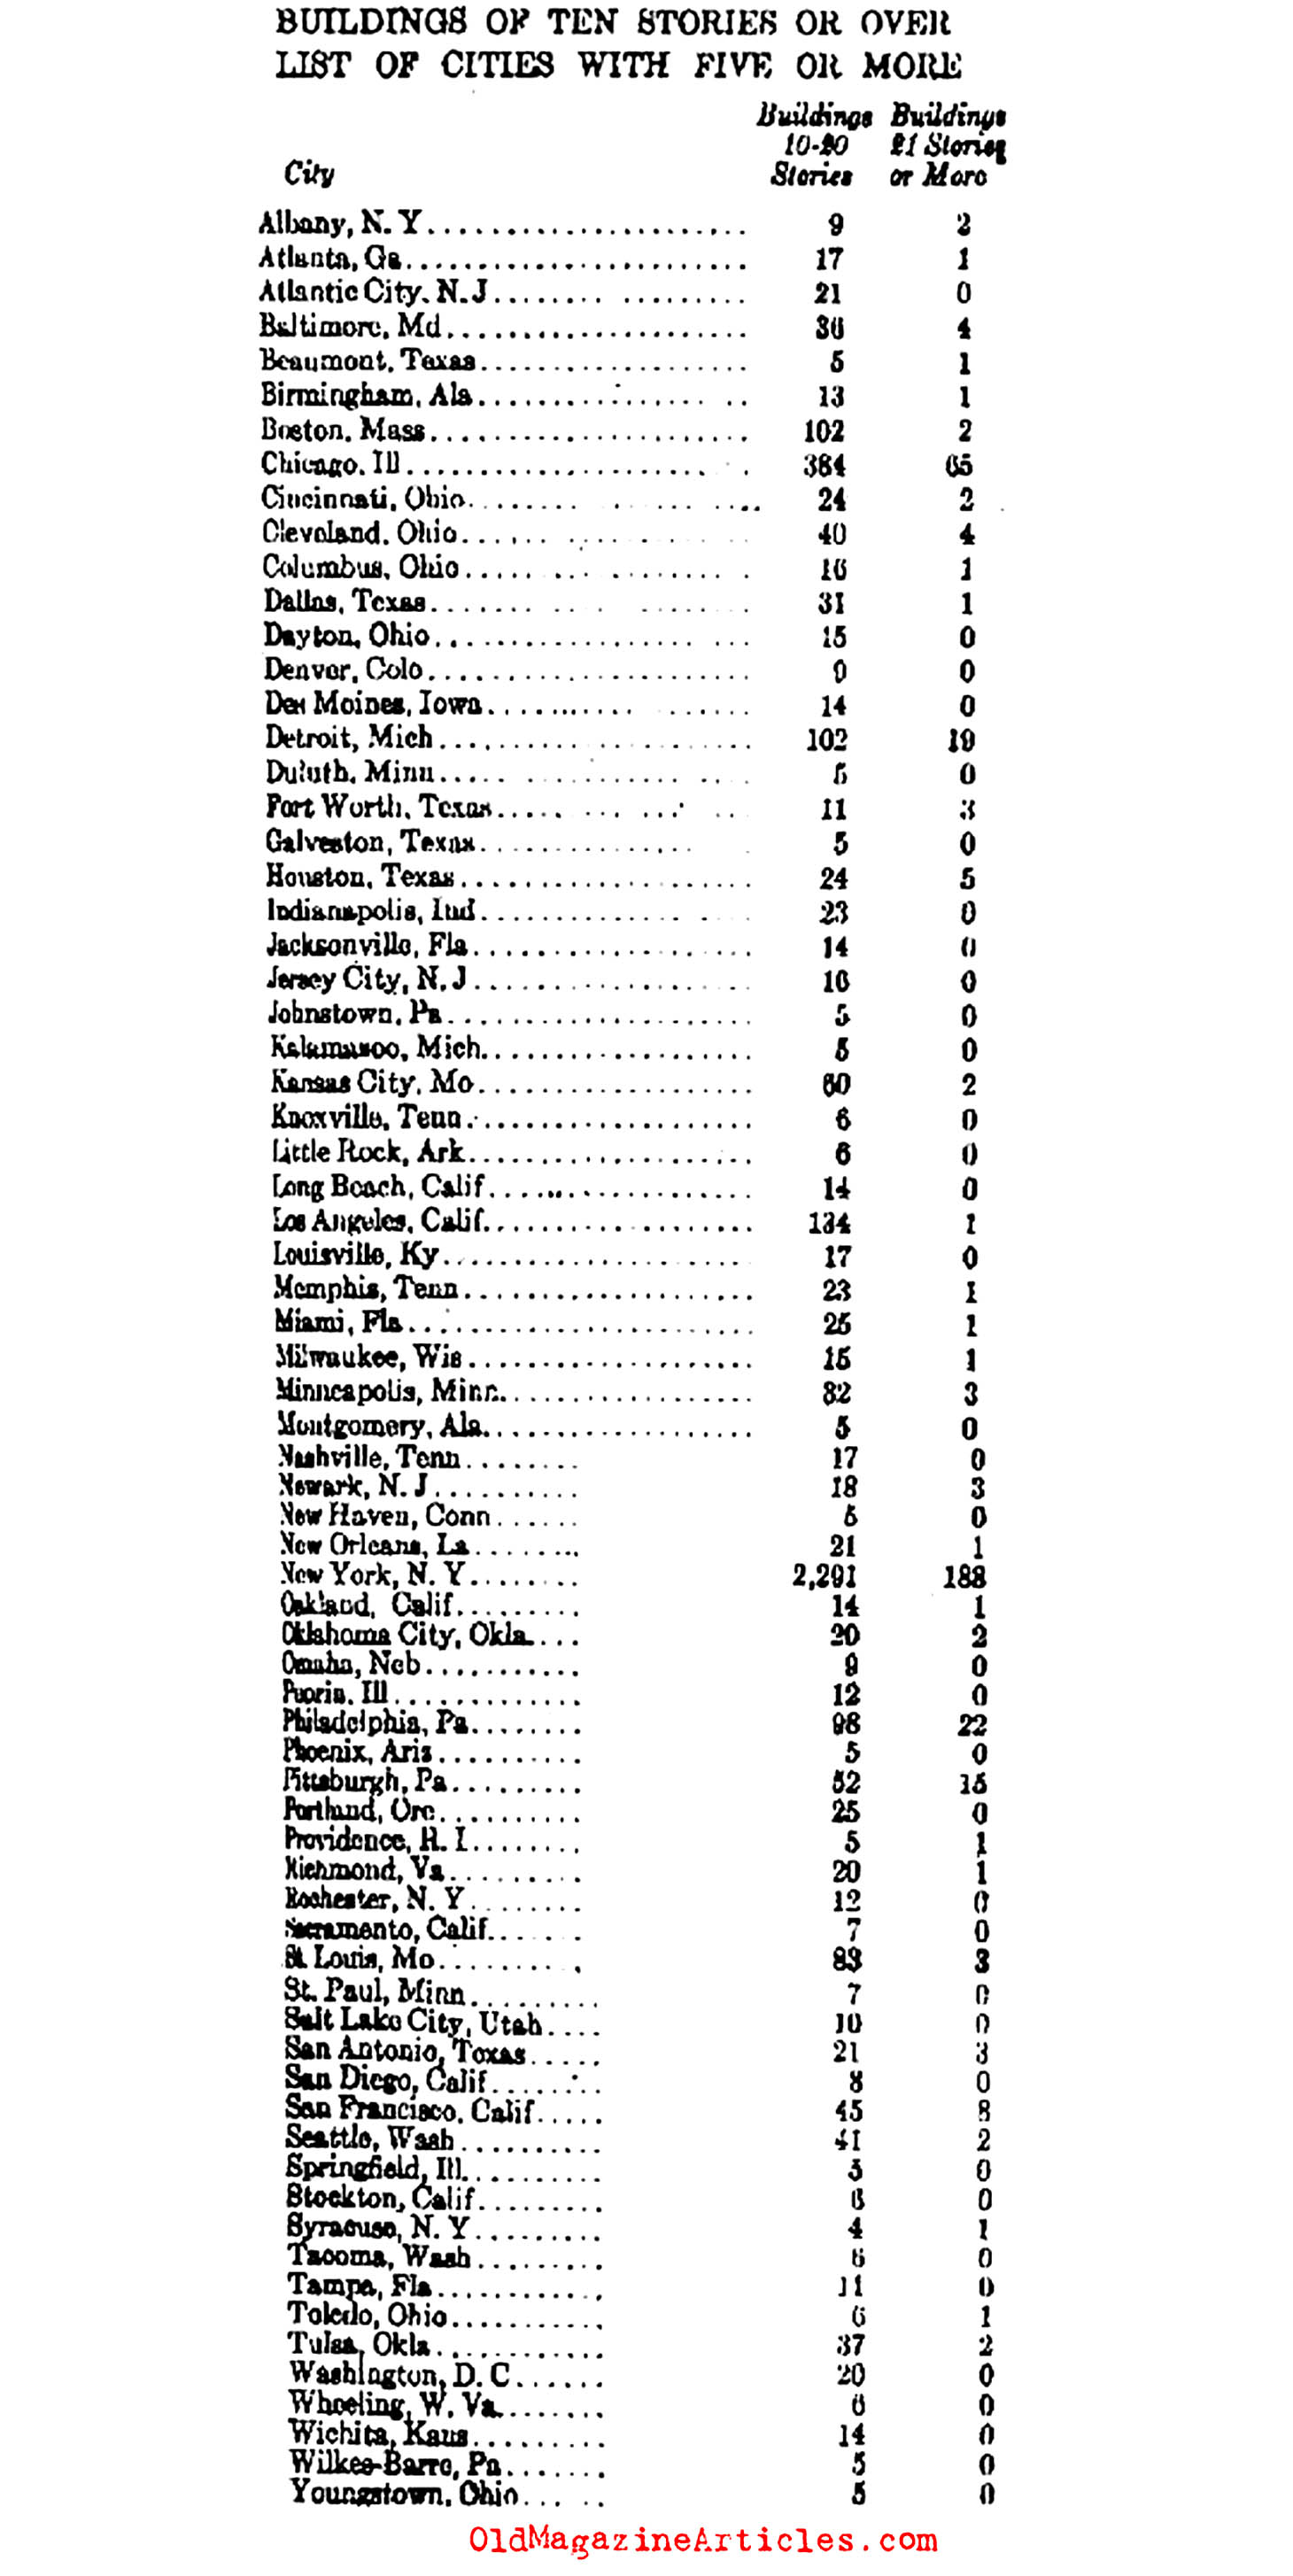 A Census of Skyscrapers (Literary Digest, 1929)